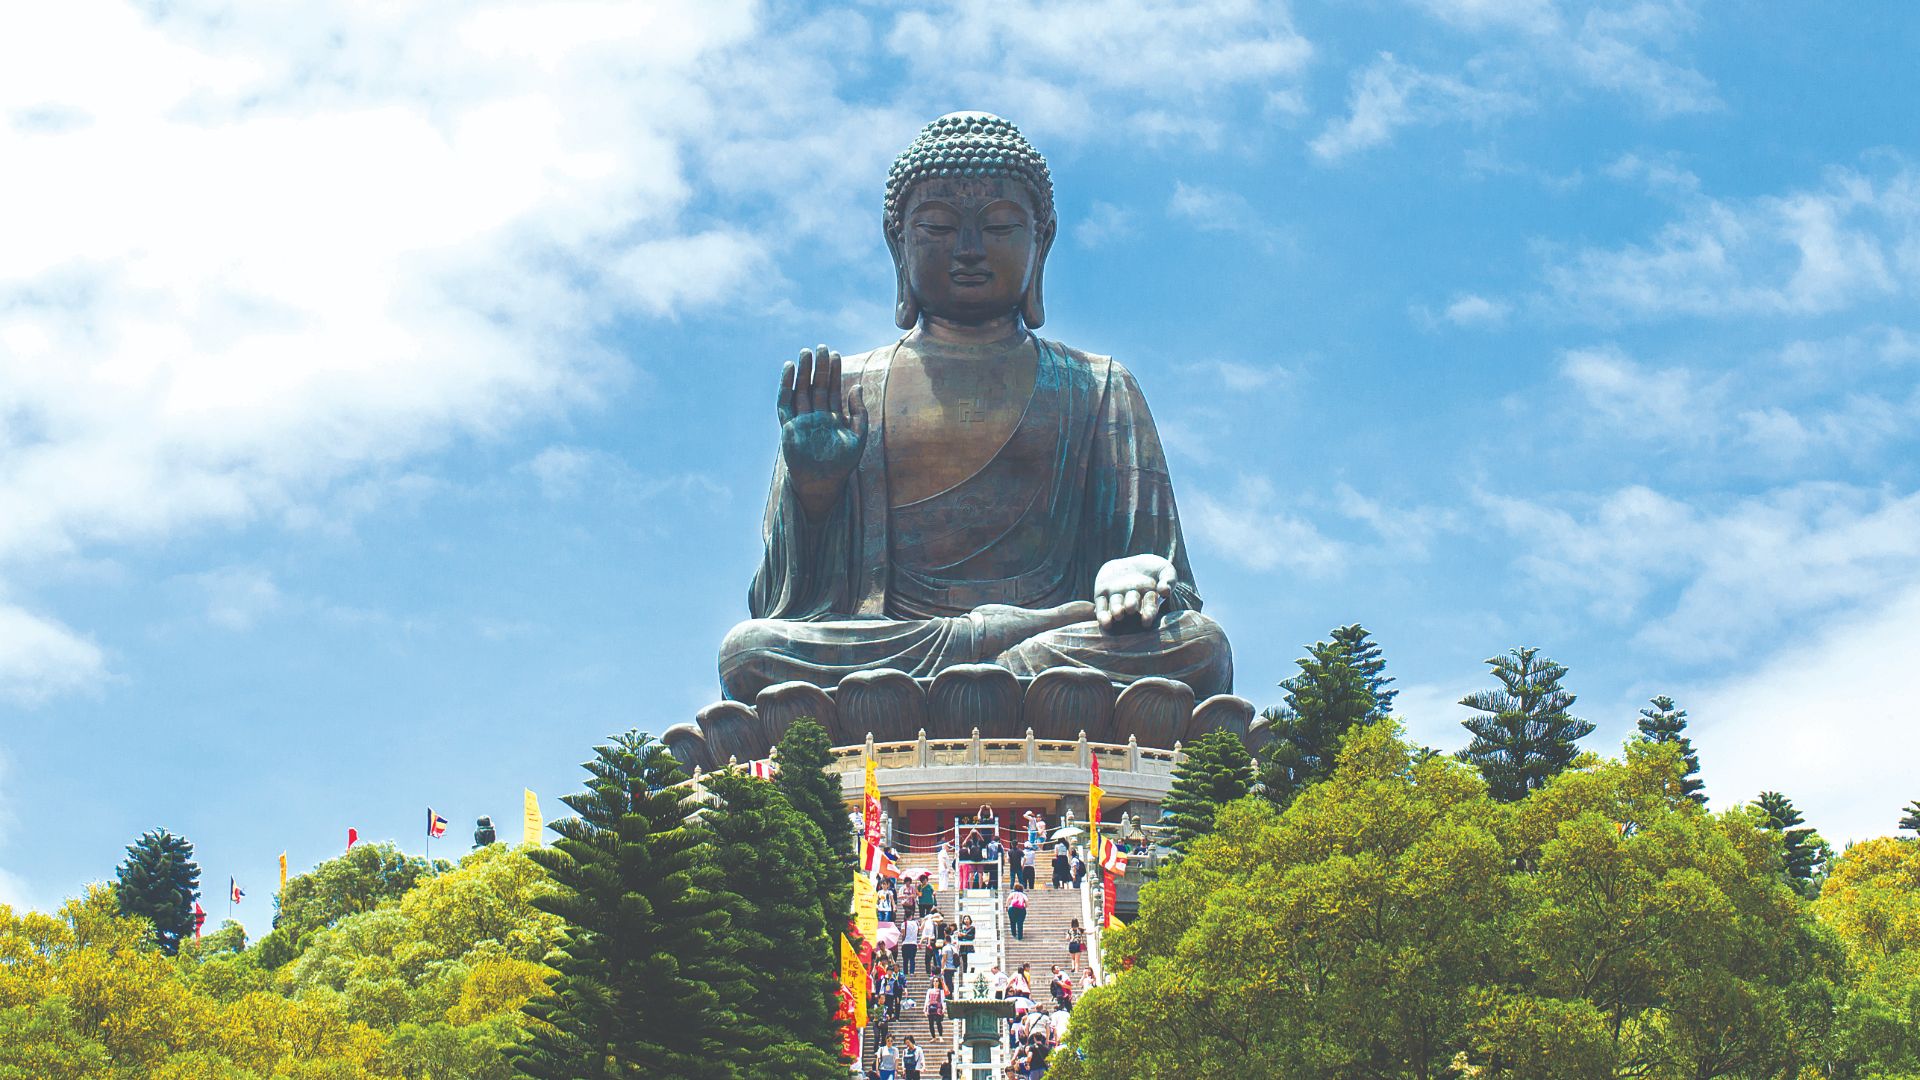 The Best Things to Do on Lantau Island